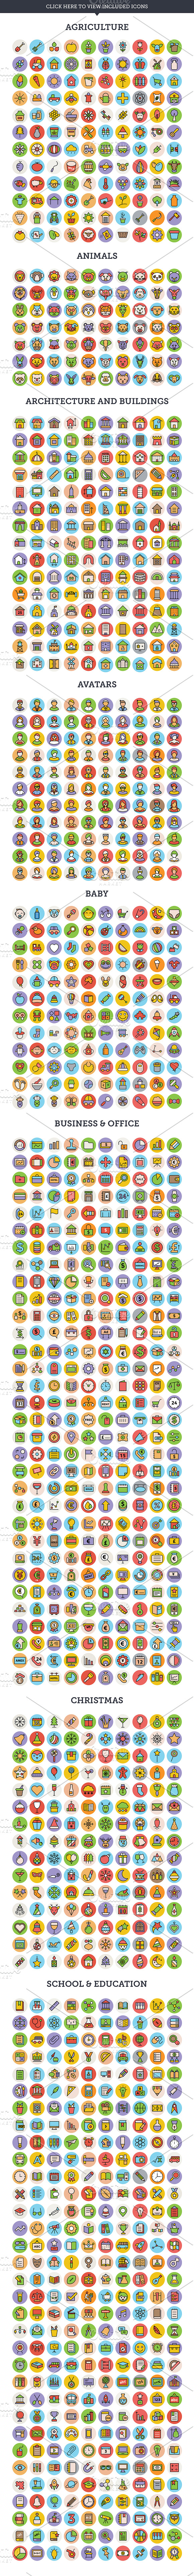 3000 Creative Vector Icons Bundle in Icons - product preview 1